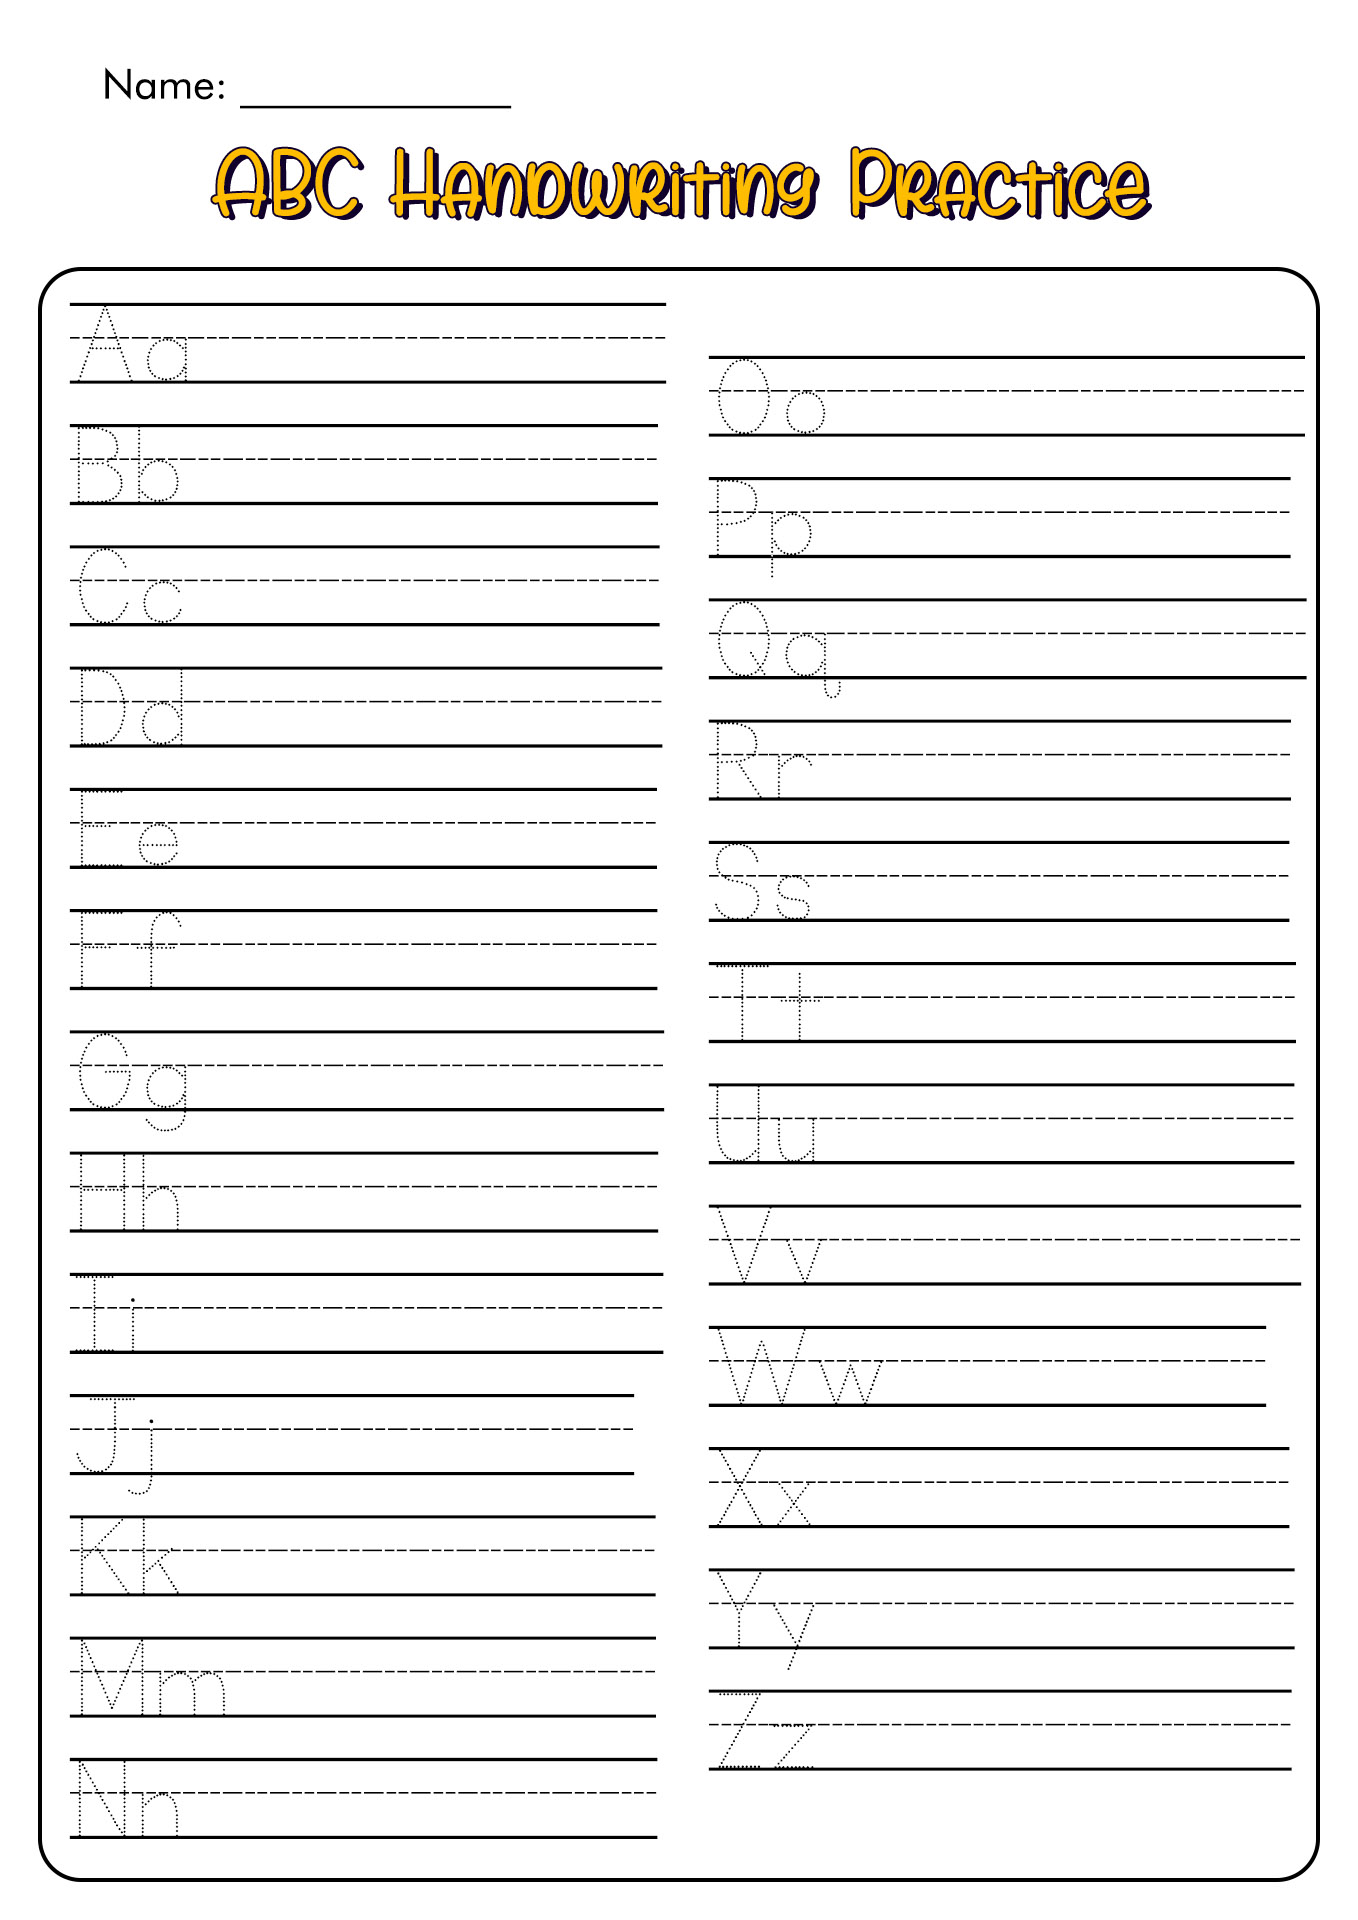 Alphabets Writing Practice Worksheets Printable